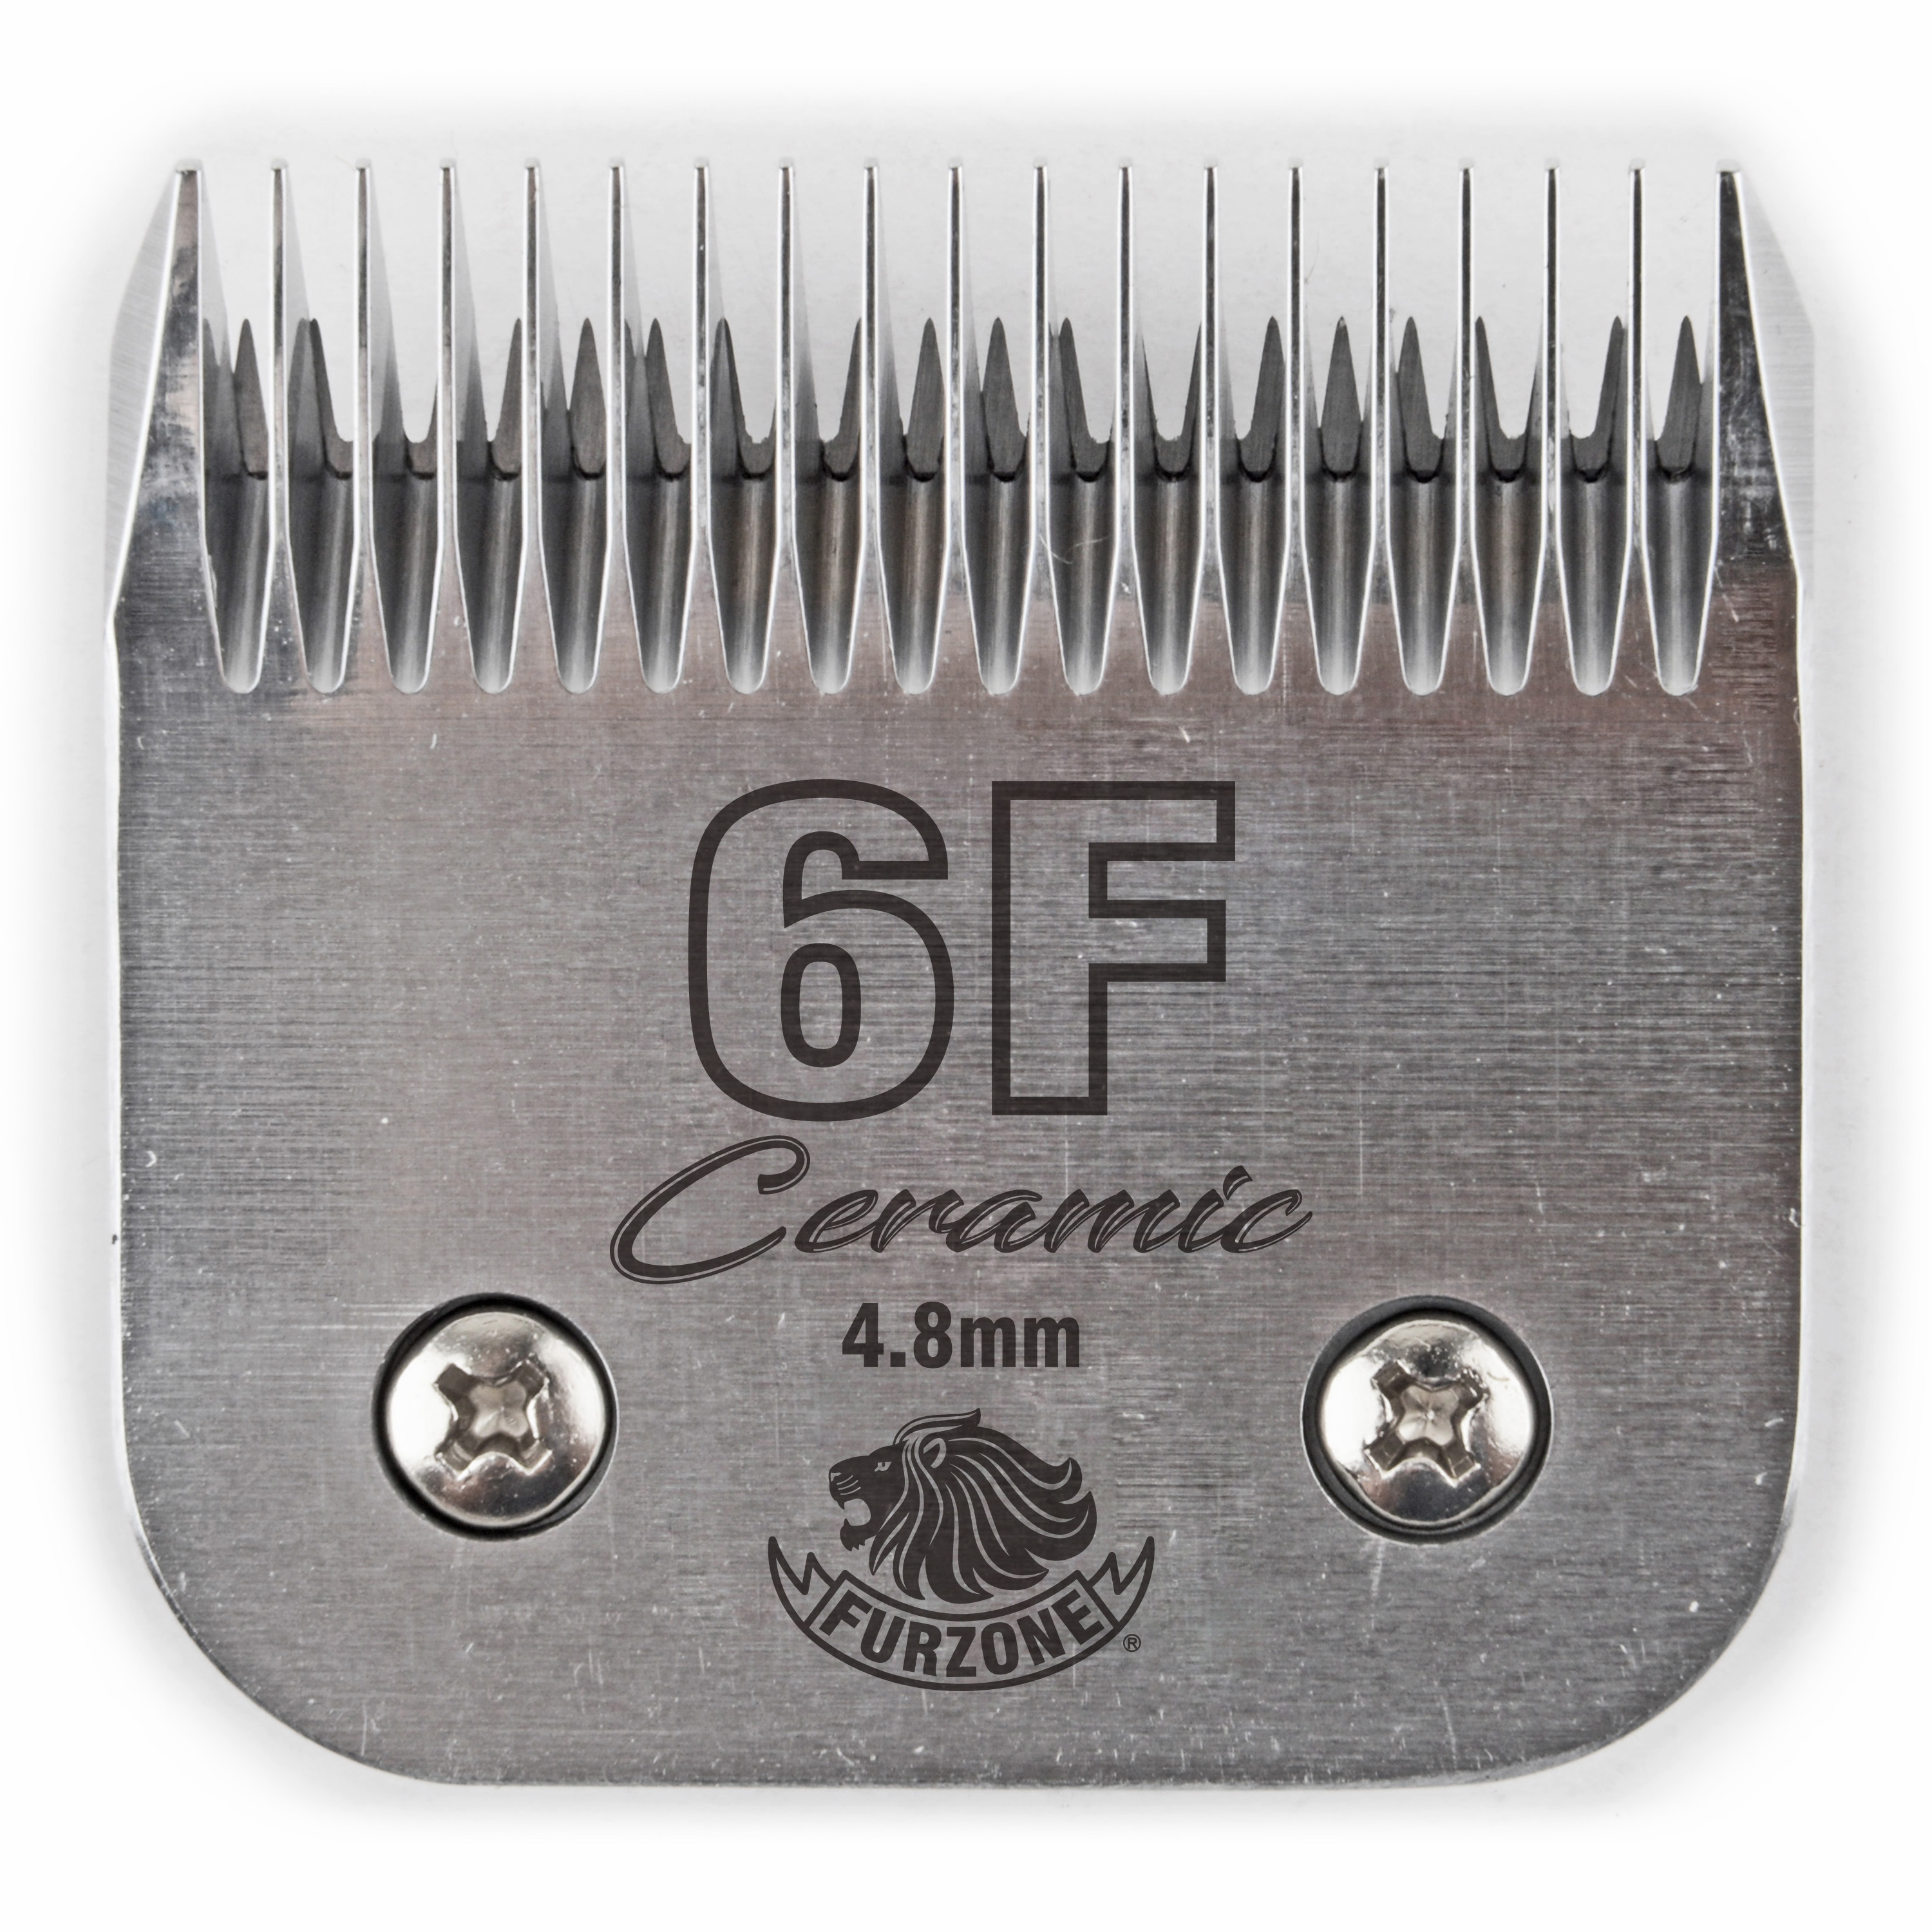 Furzone #6F-4.8mm-Full Teeth Professional A5 Detachable Blade - Made Of High-Tech Ceramic Materials